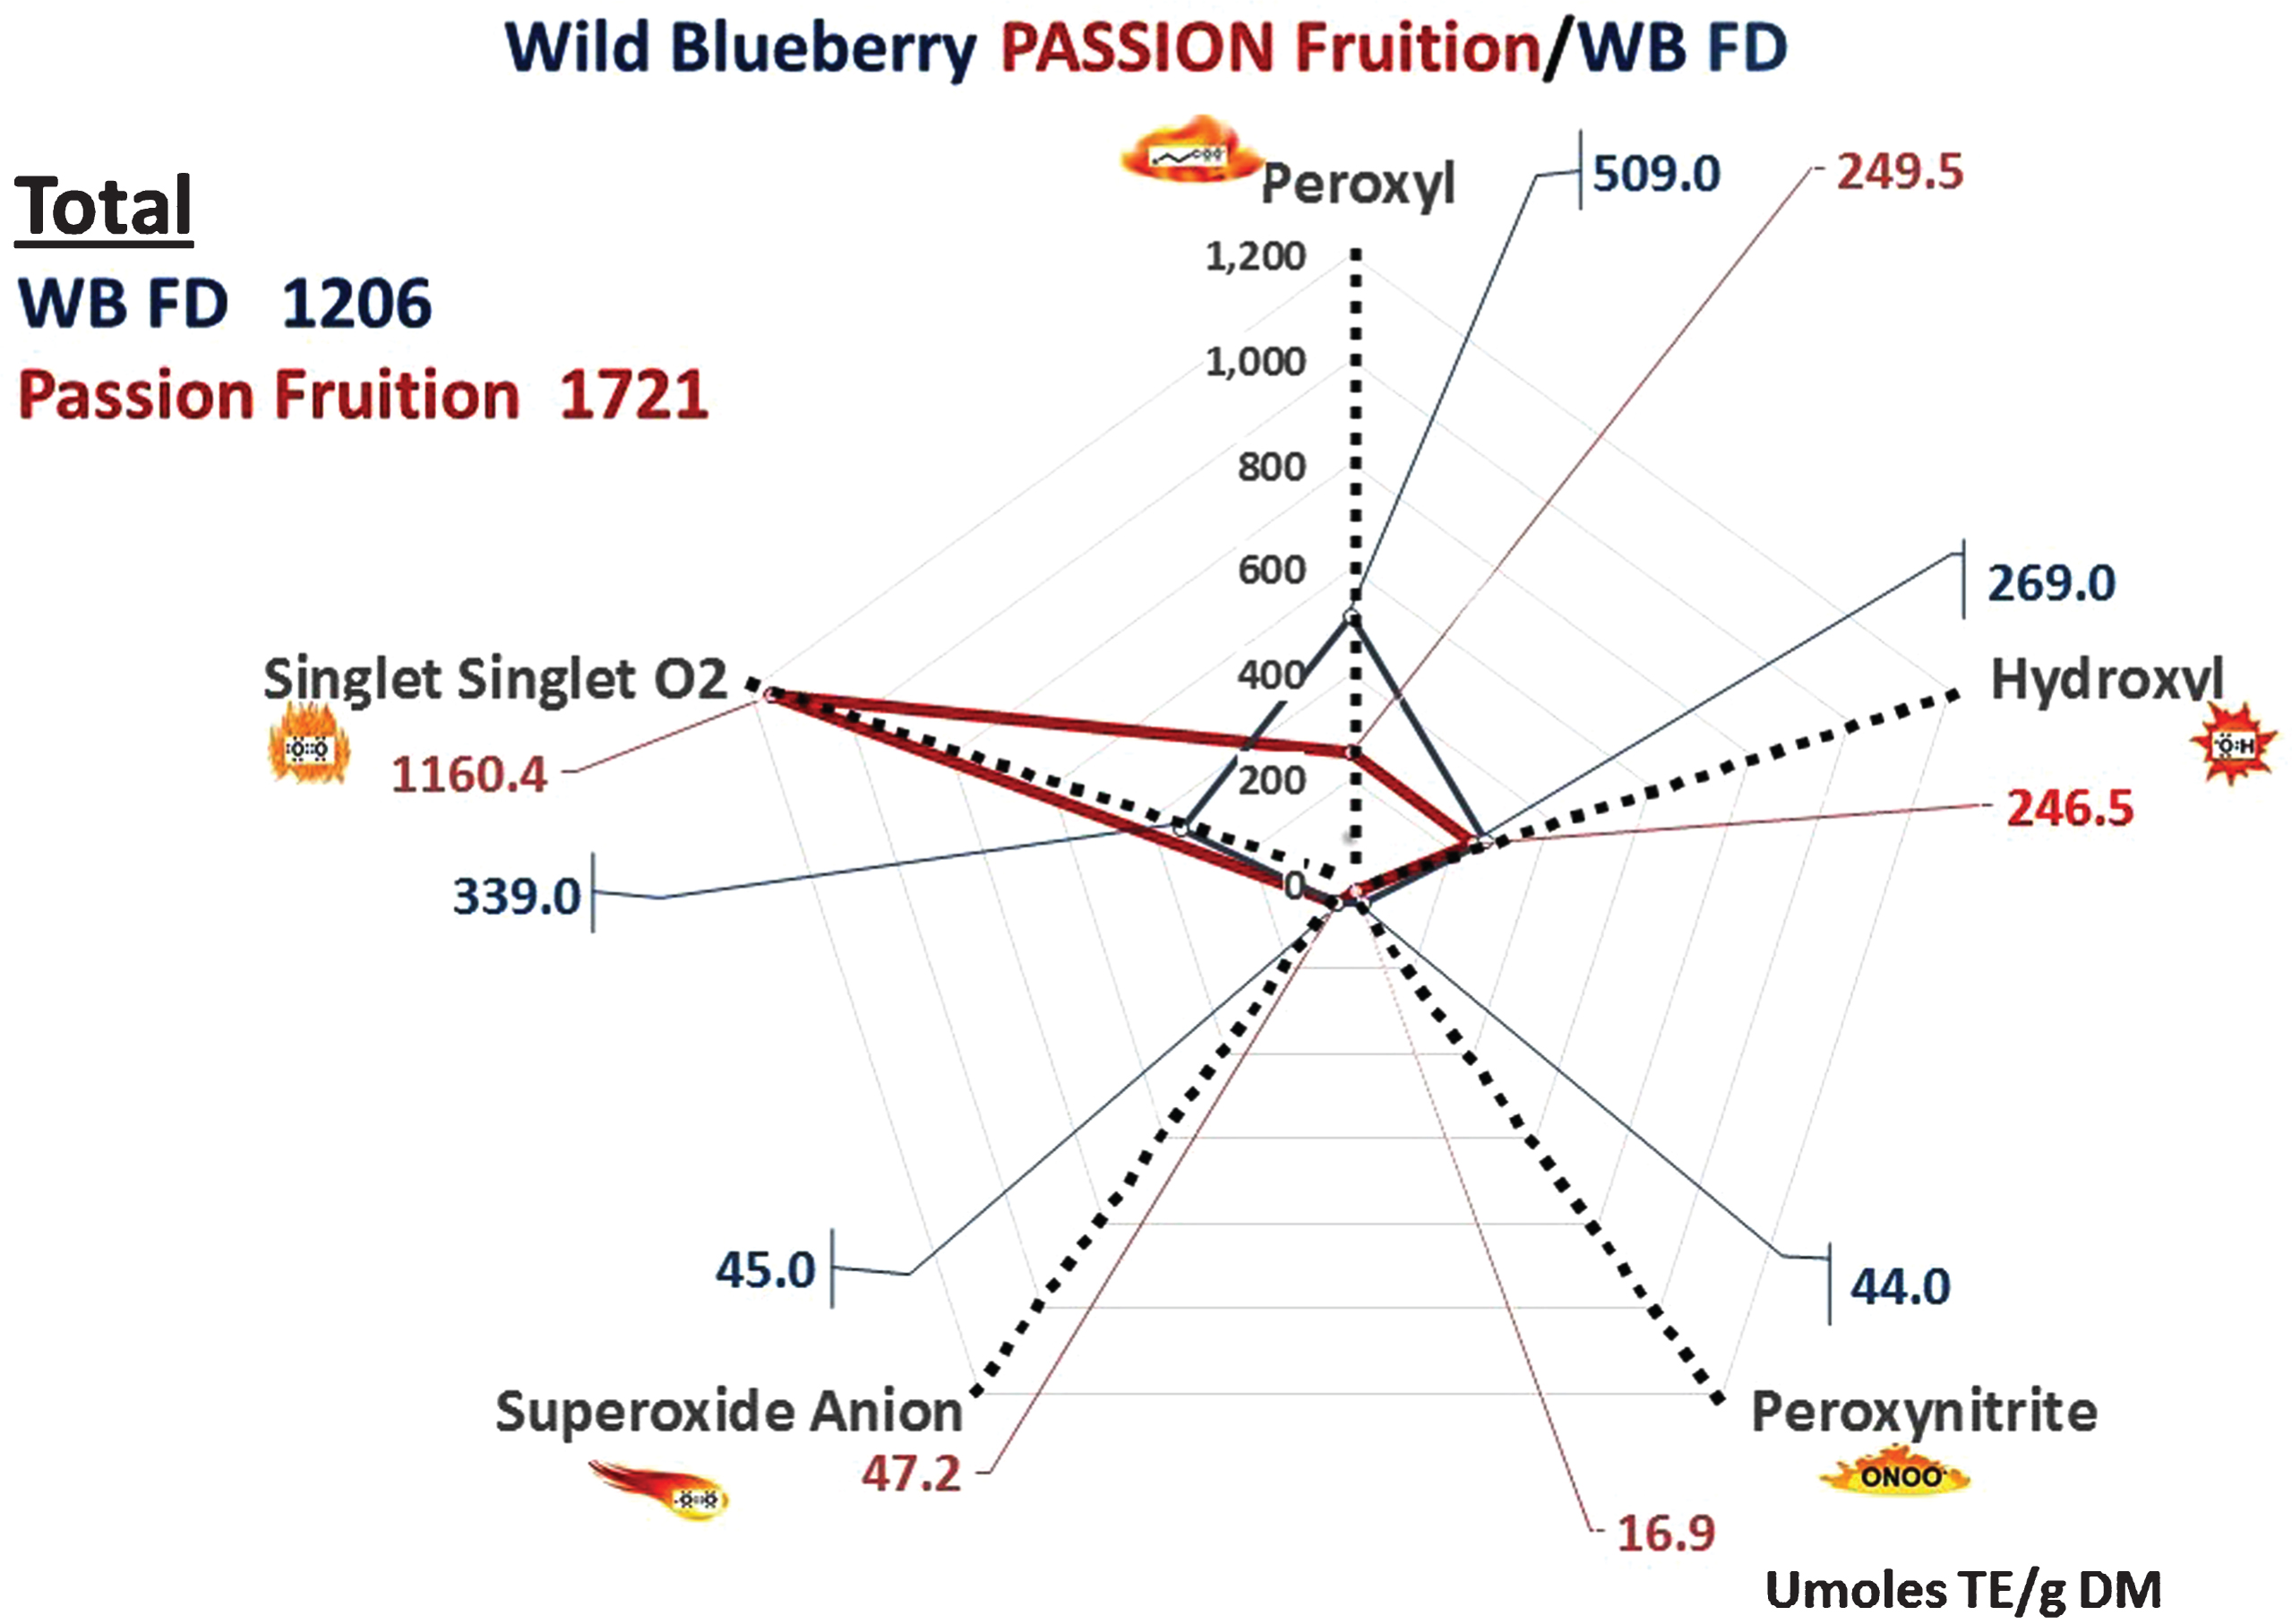 Radial plot comparison of Wild Blueberry (WB) Passion Fruition and Wild Blueberry freeze dried powder (WB FD) (2013). Antioxidant data expressed as μmole TE/g dry matter (DM). Values for each radical are indicated on the respective radial arm.